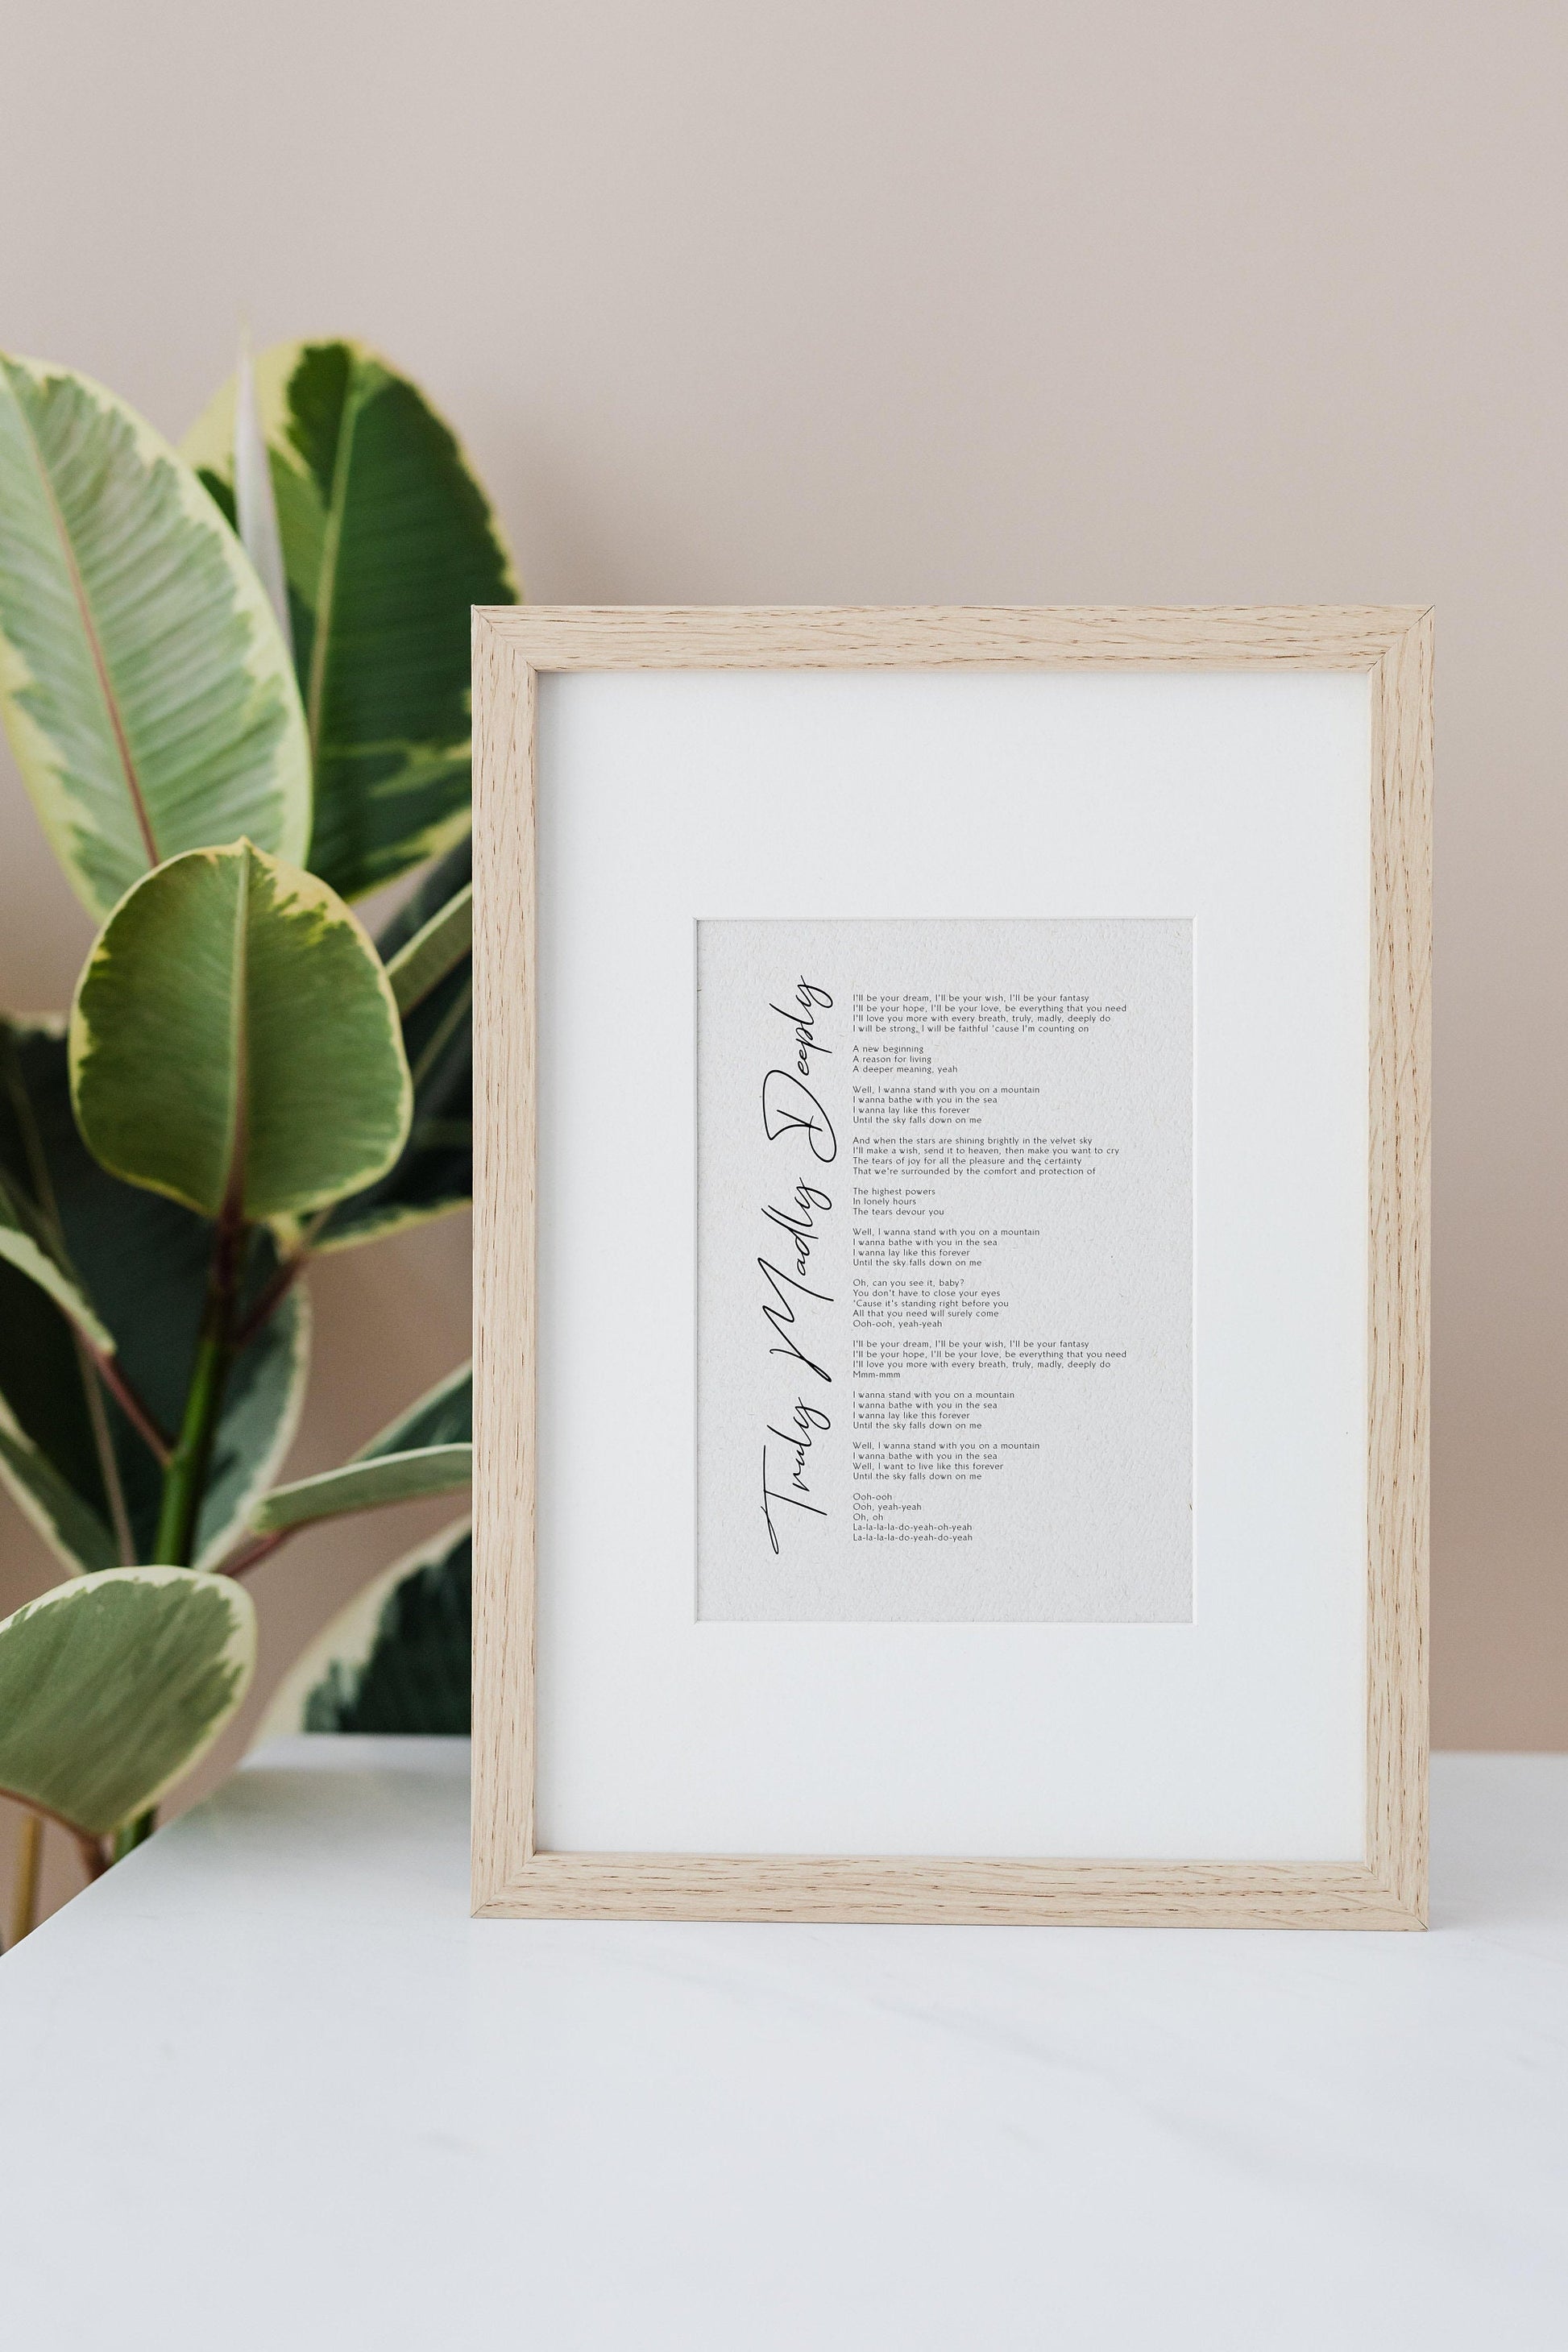 Truly Madly Deeply Song Lyrics Print by Savage Garden, Truly Madly Deeply Song Lyrics Print Framed - Love Song Poster Print Savage Garden